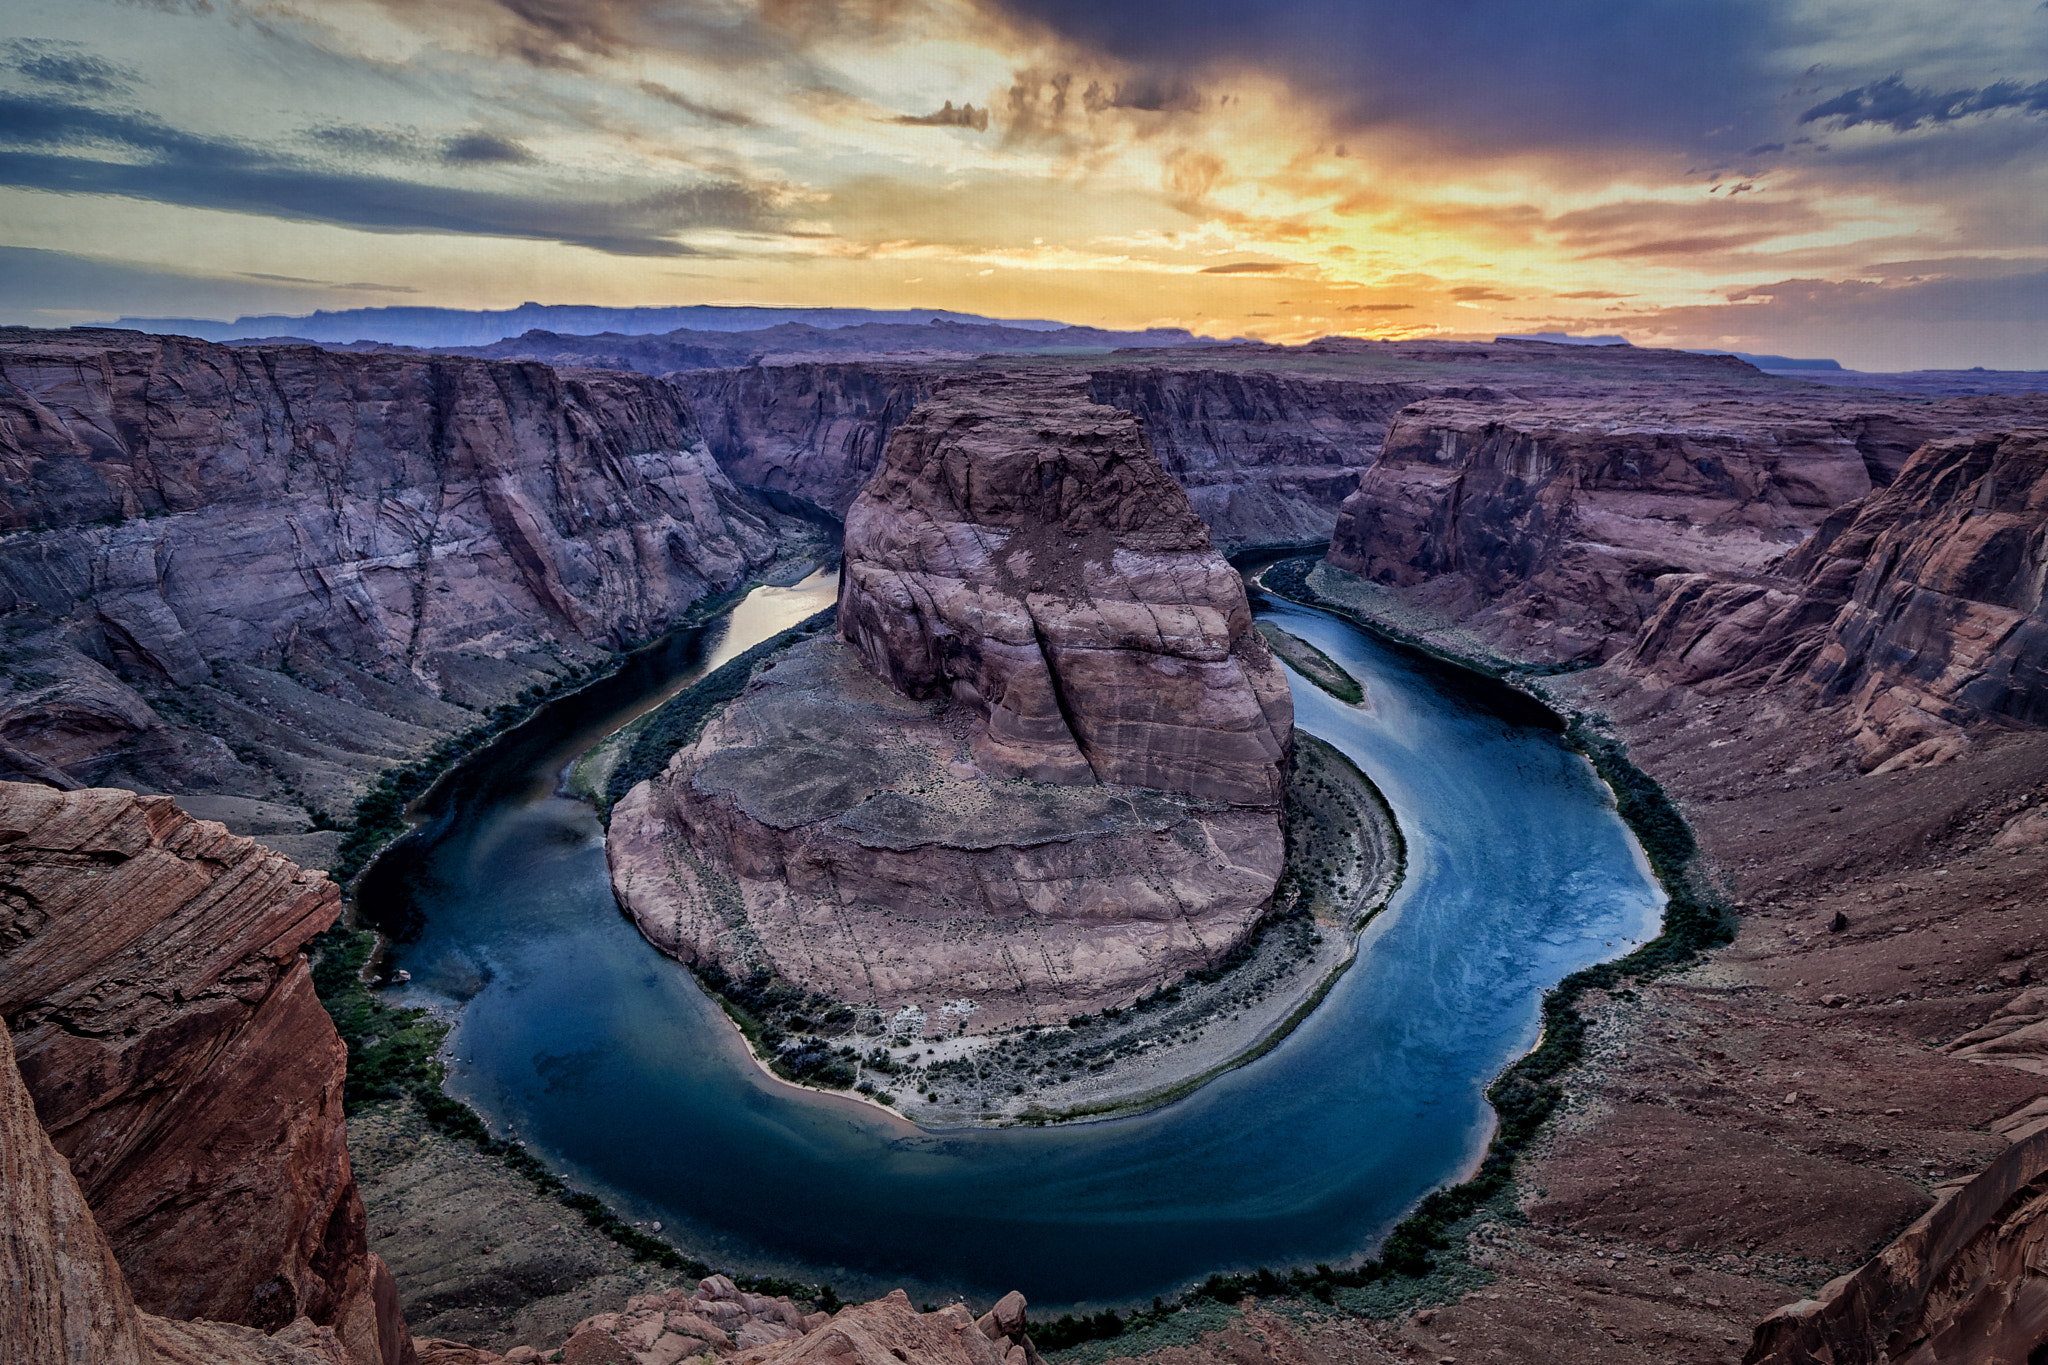 Sony a99 II sample photo. Horseshoe bend after sunset photography